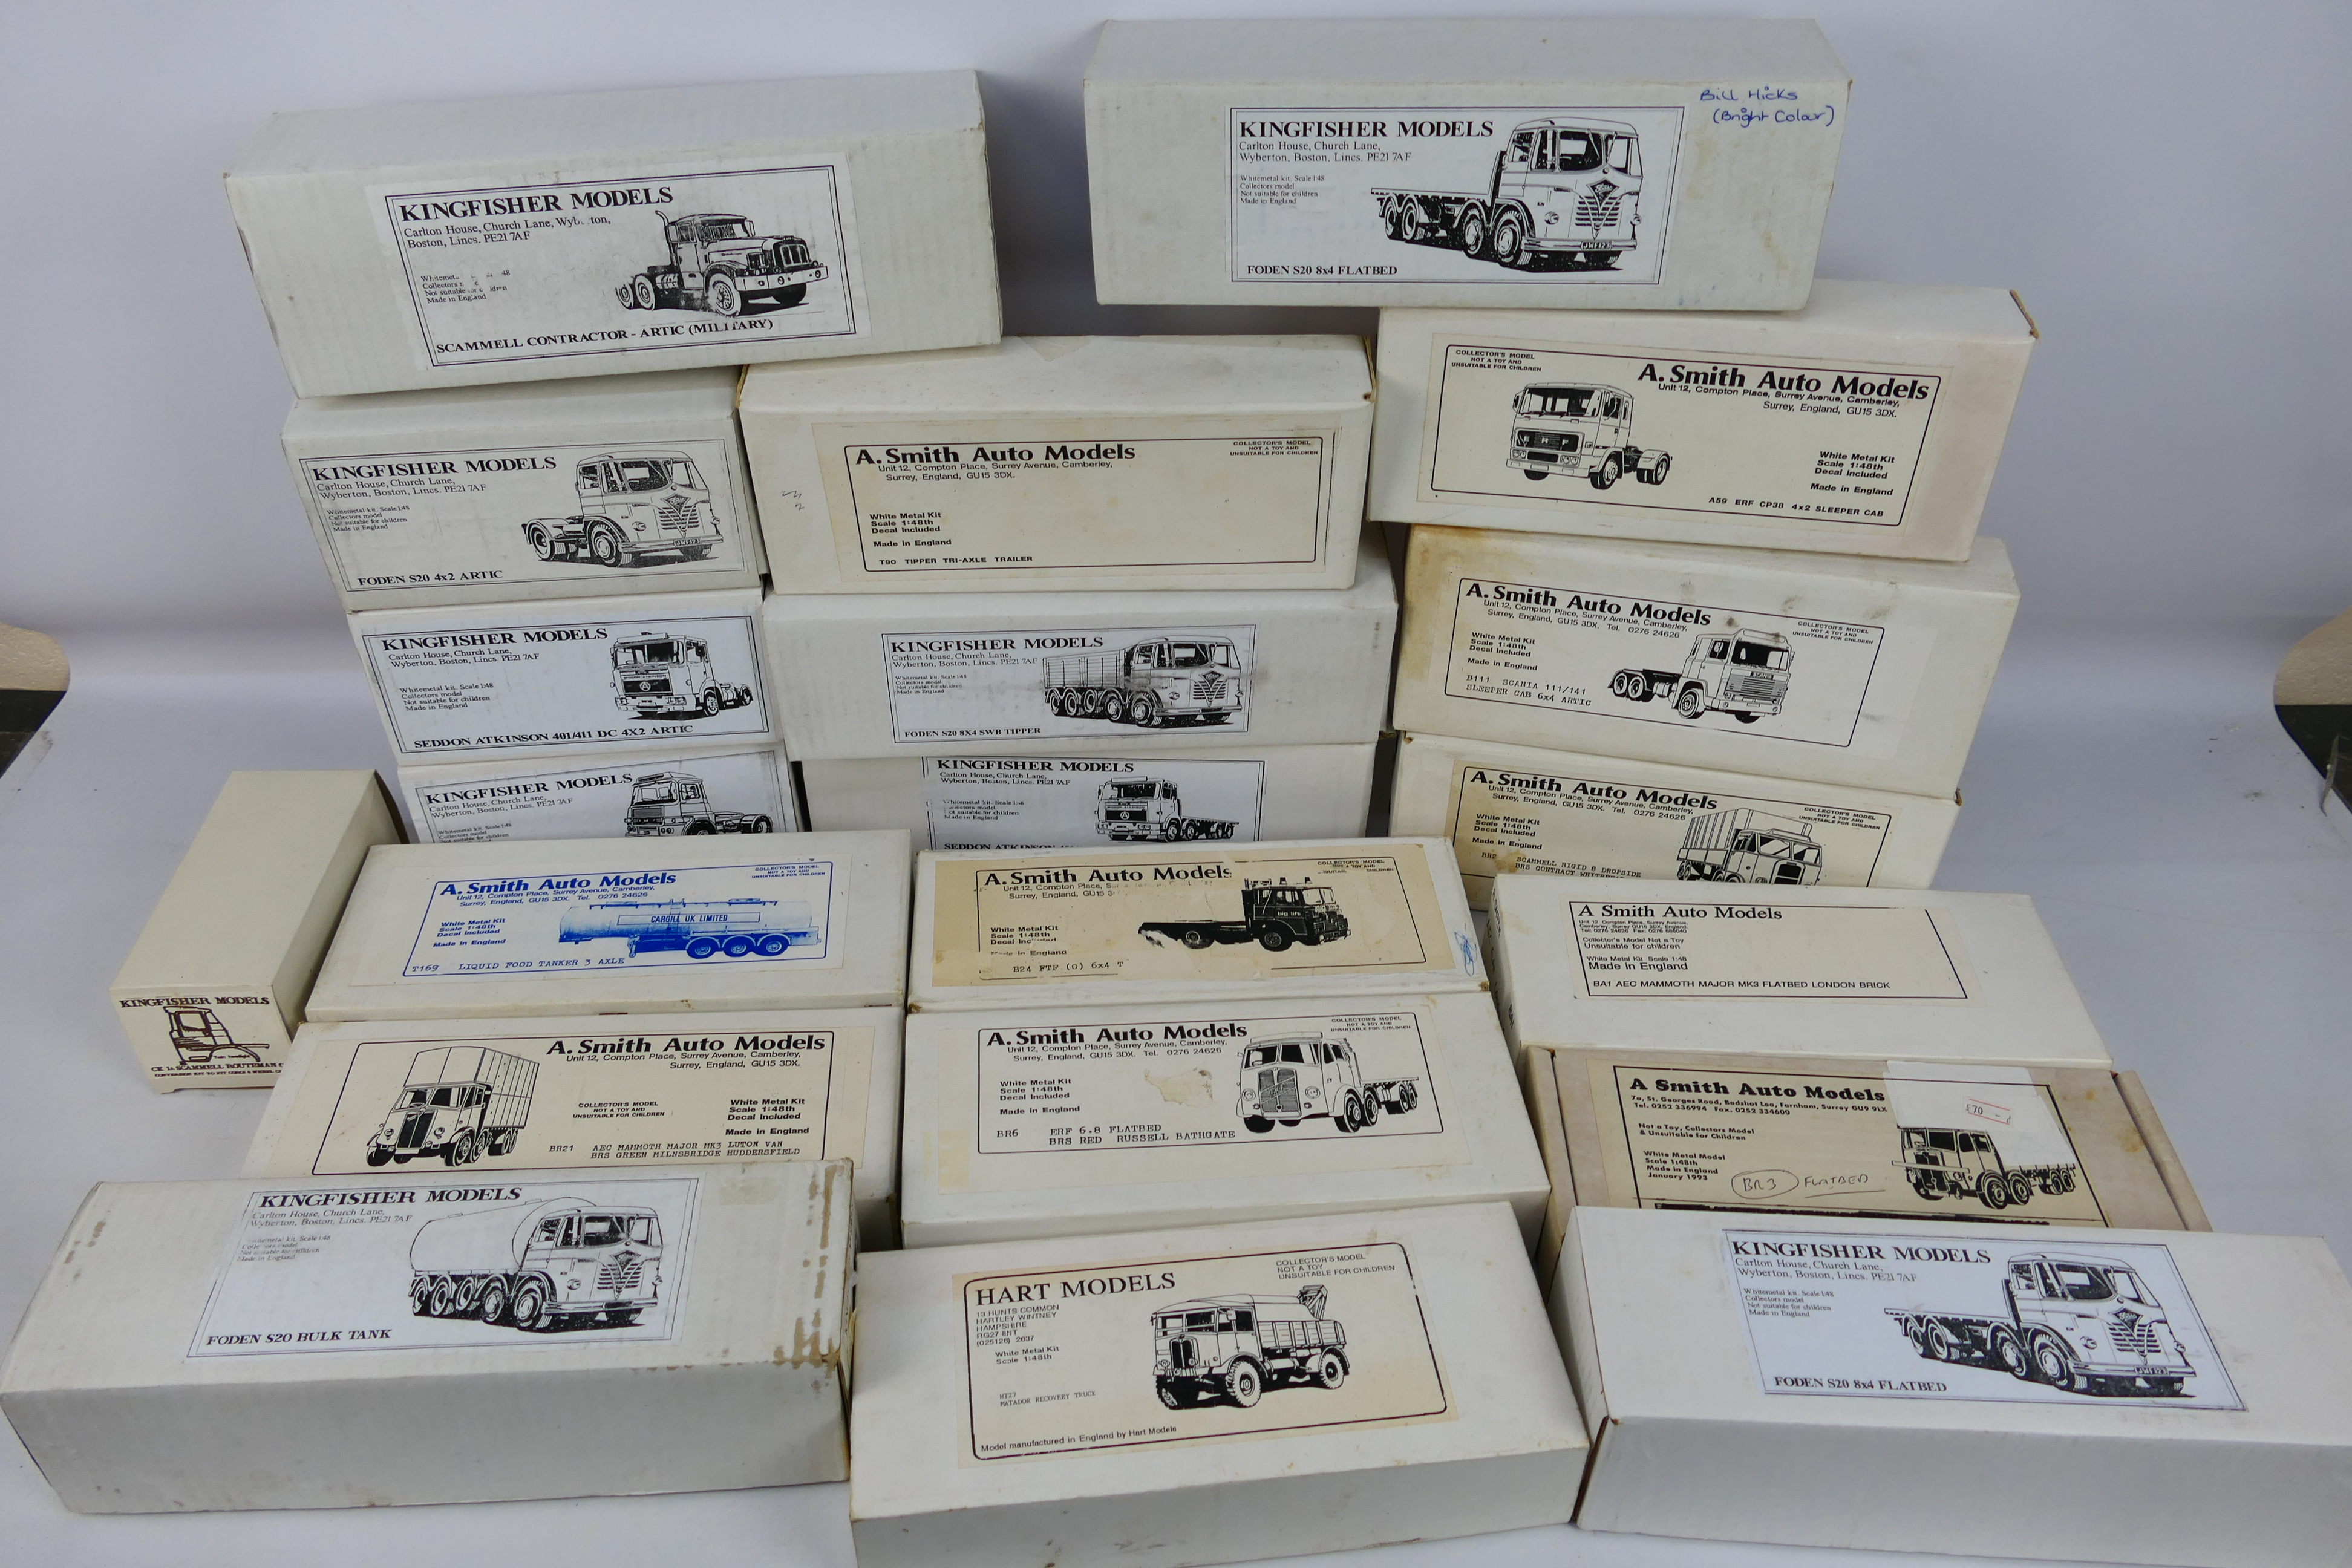 Kingfisher Models - Alan Smith Models - A group of 21 EMPTY Boxes for various white metal